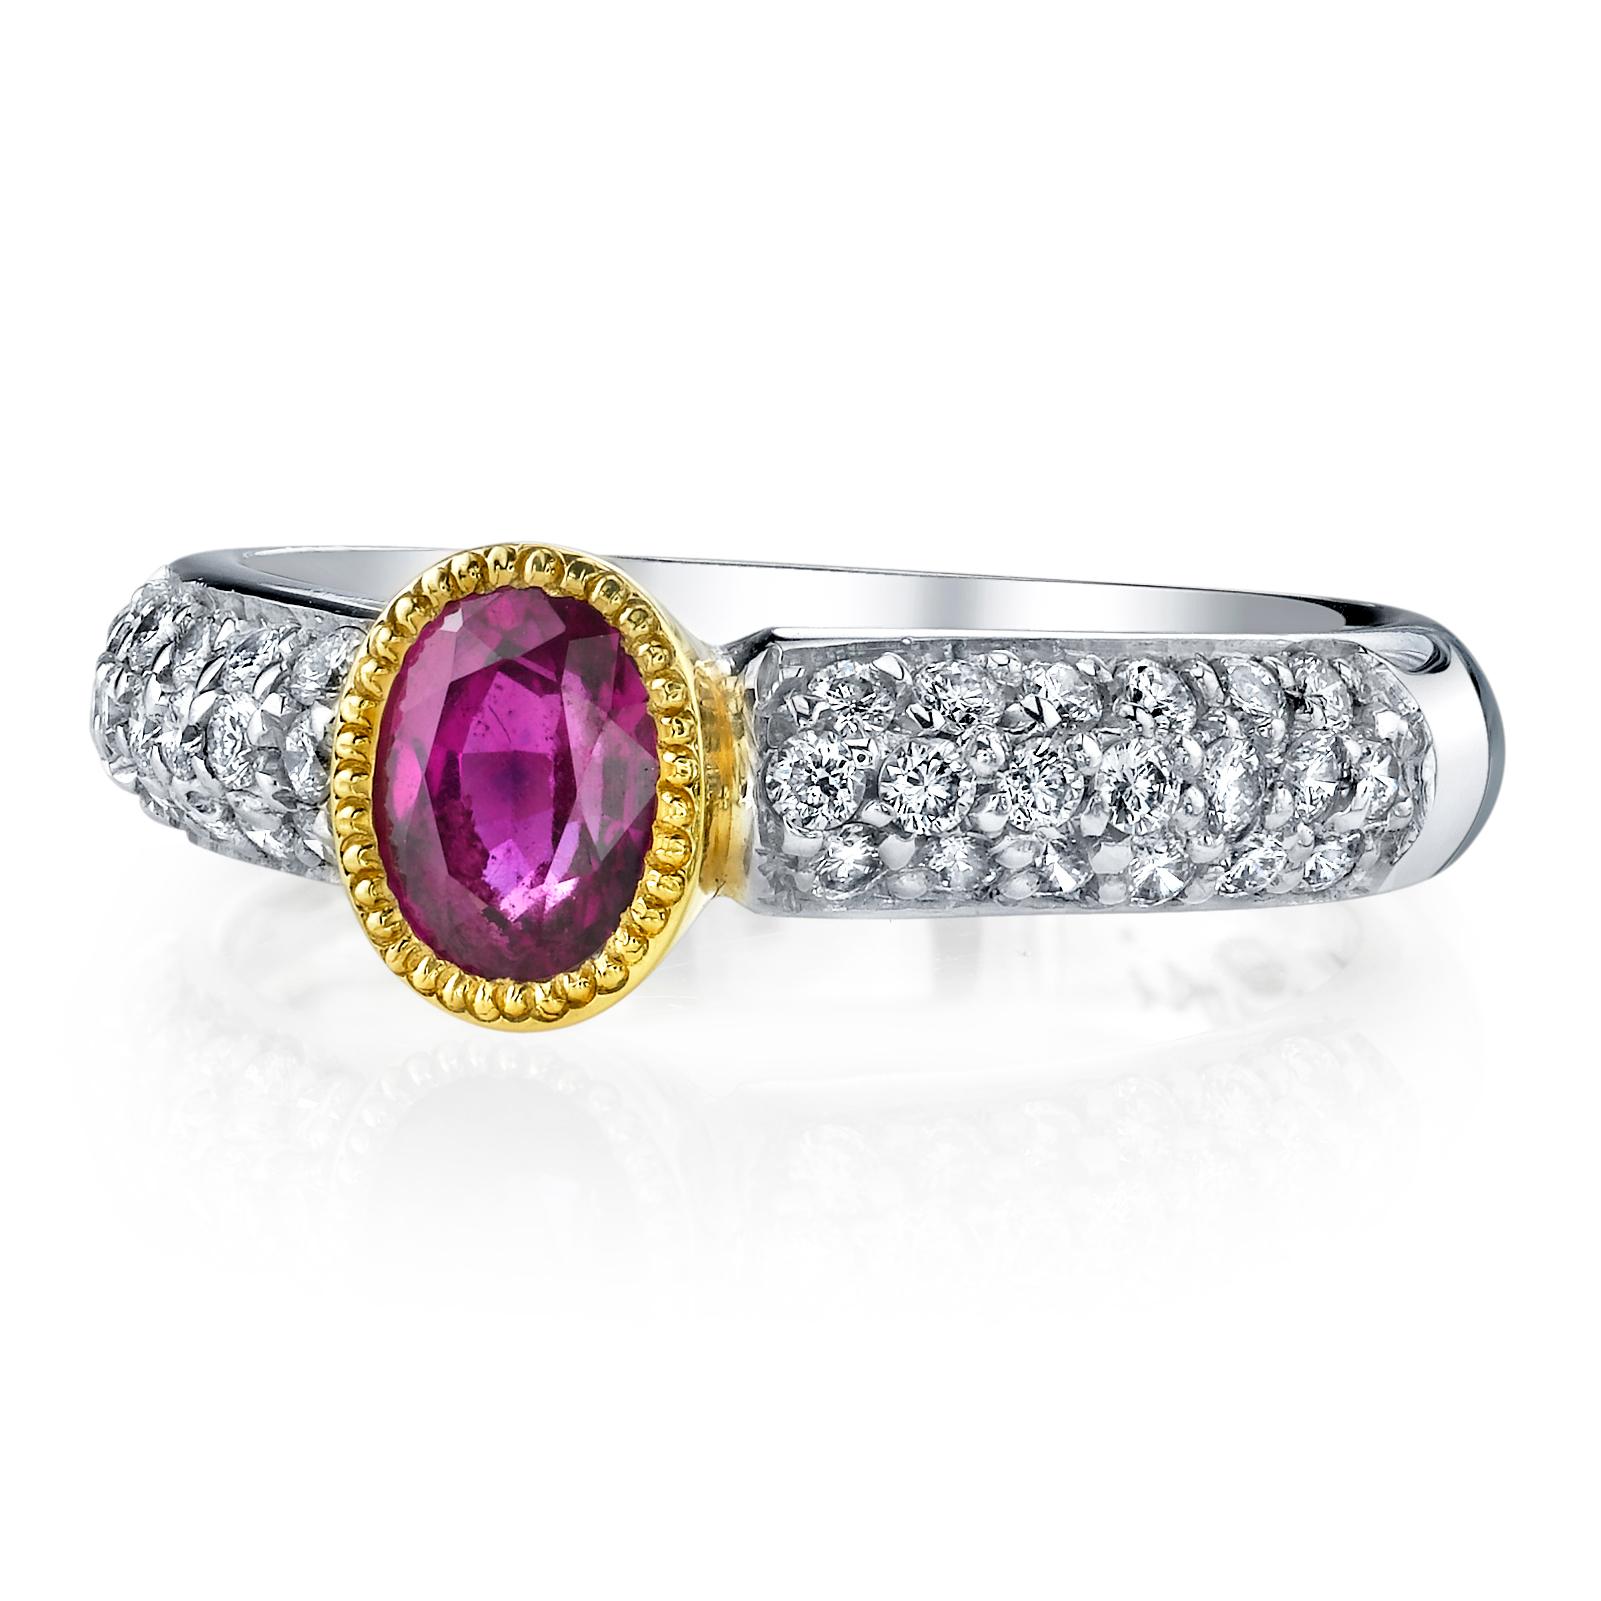 This eye-catching Burmese ruby and diamond ring features a vibrant .91 carat bright pinkish ruby set in a rich 18k yellow gold bezel that has been embellished with beautiful detail. The white gold band has been 